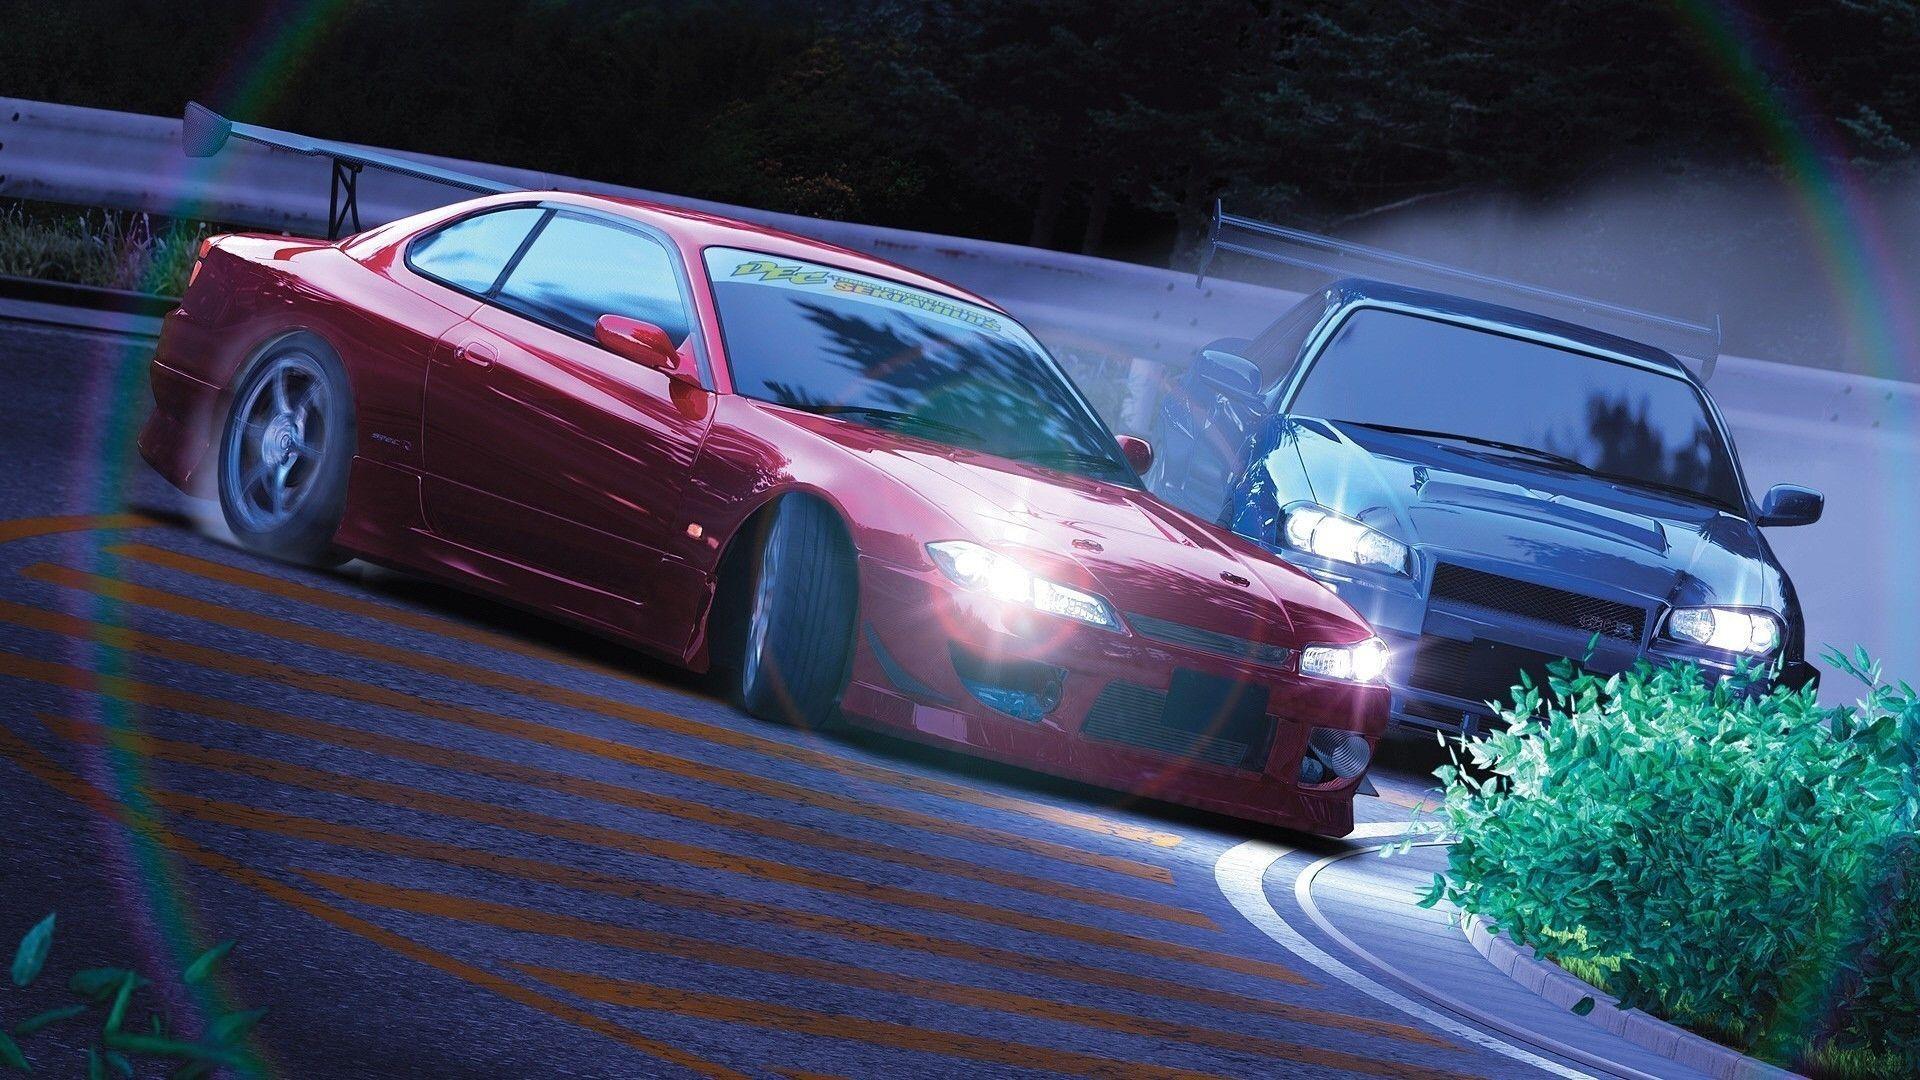 image For > Initial D Wallpaper